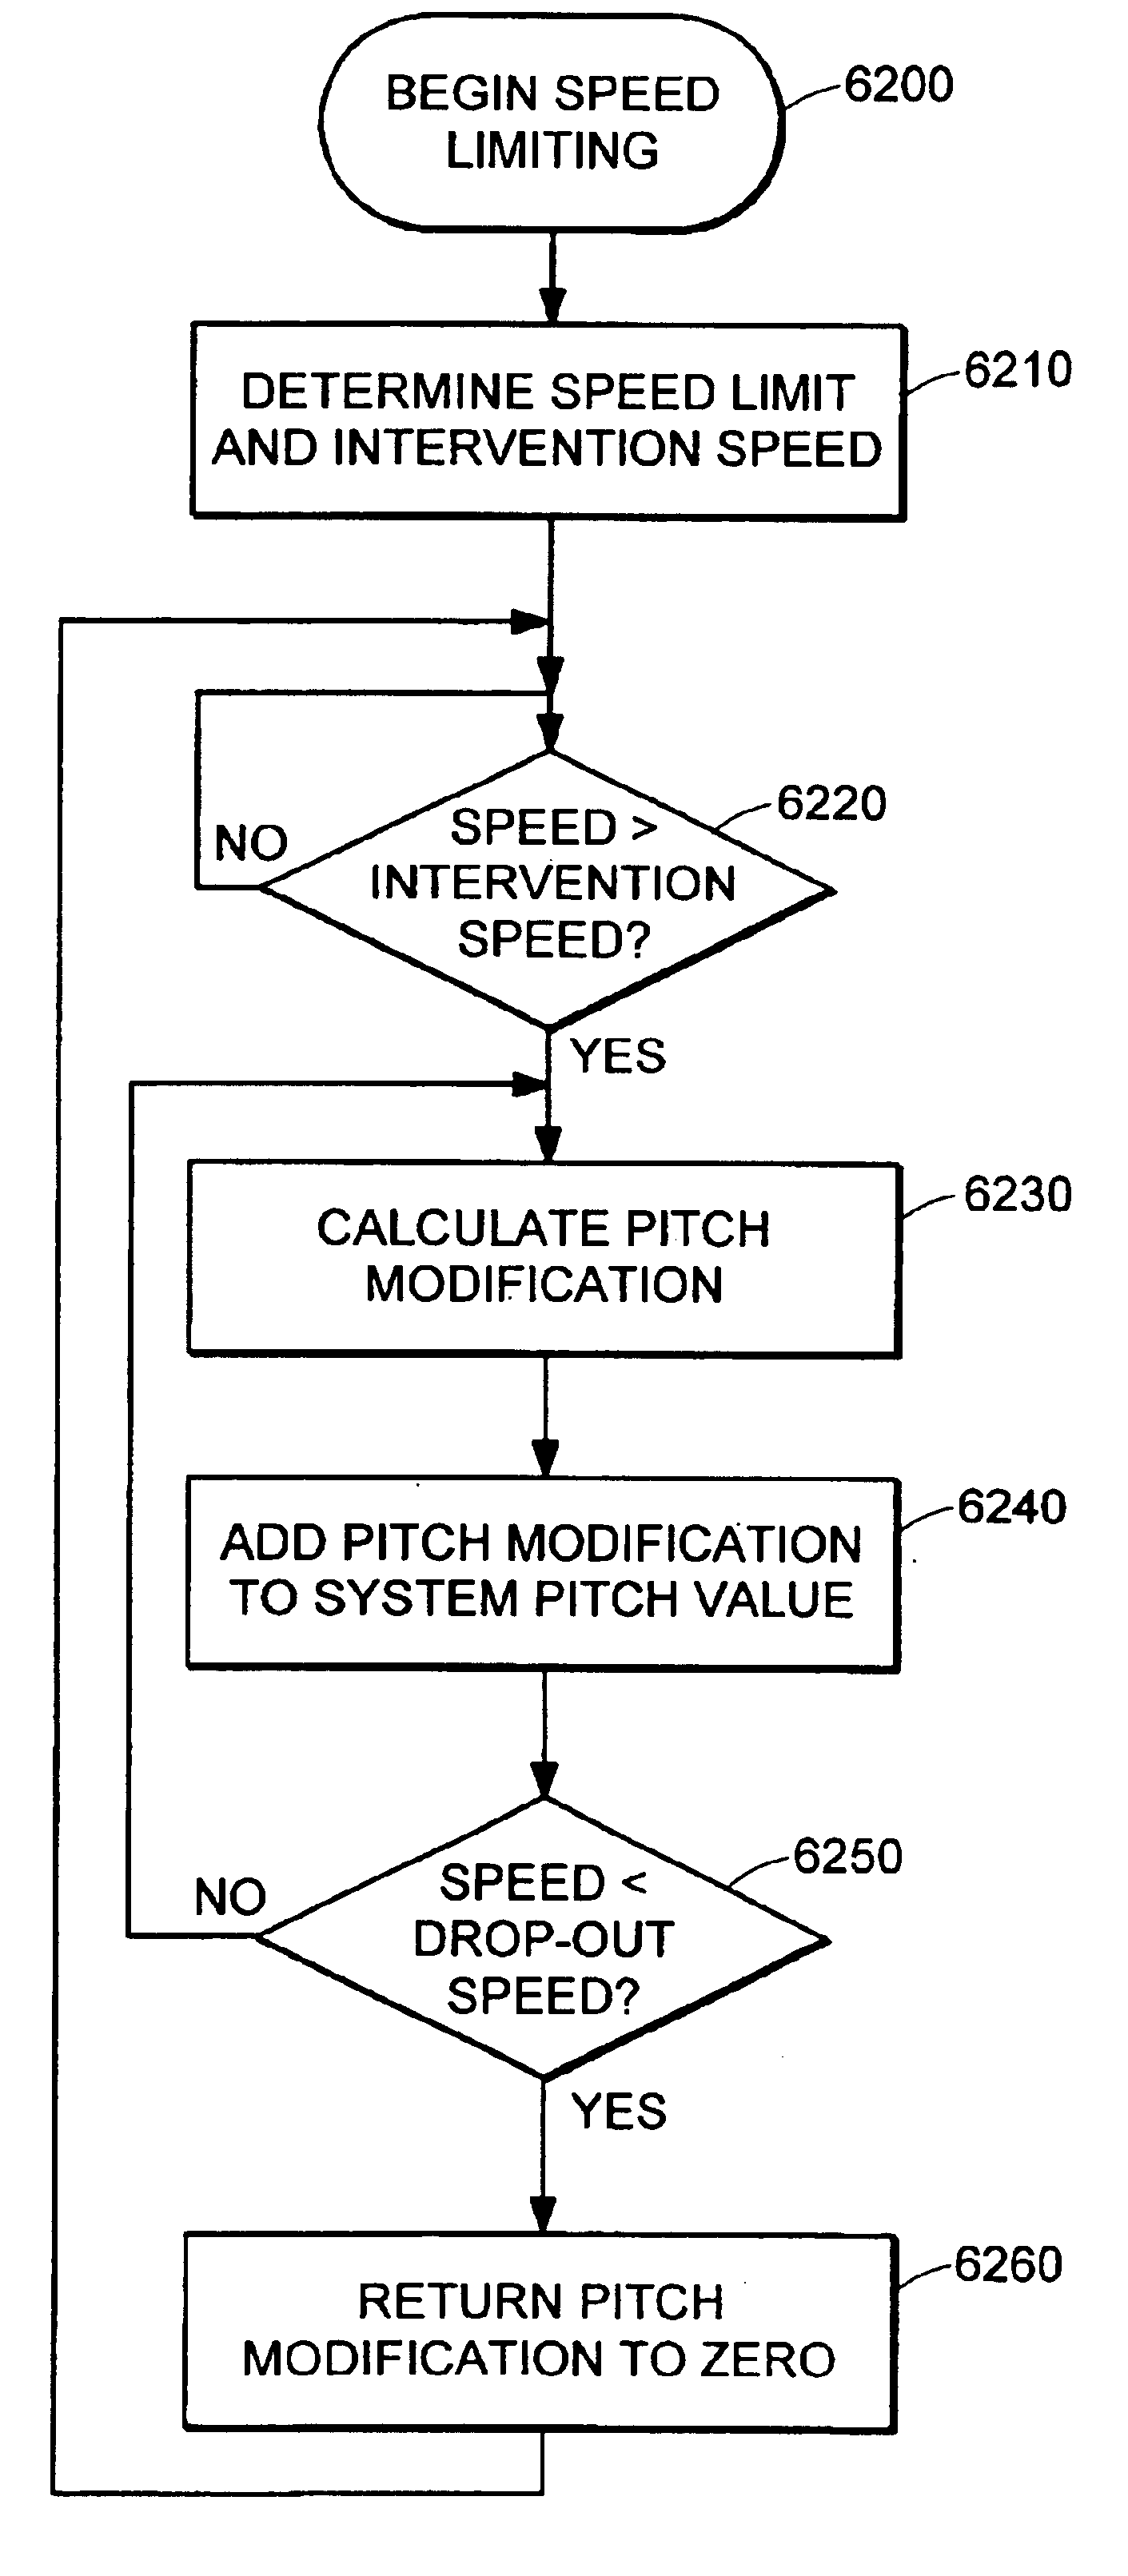 Speed limiting for a balancing transporter accounting for variations in system capability